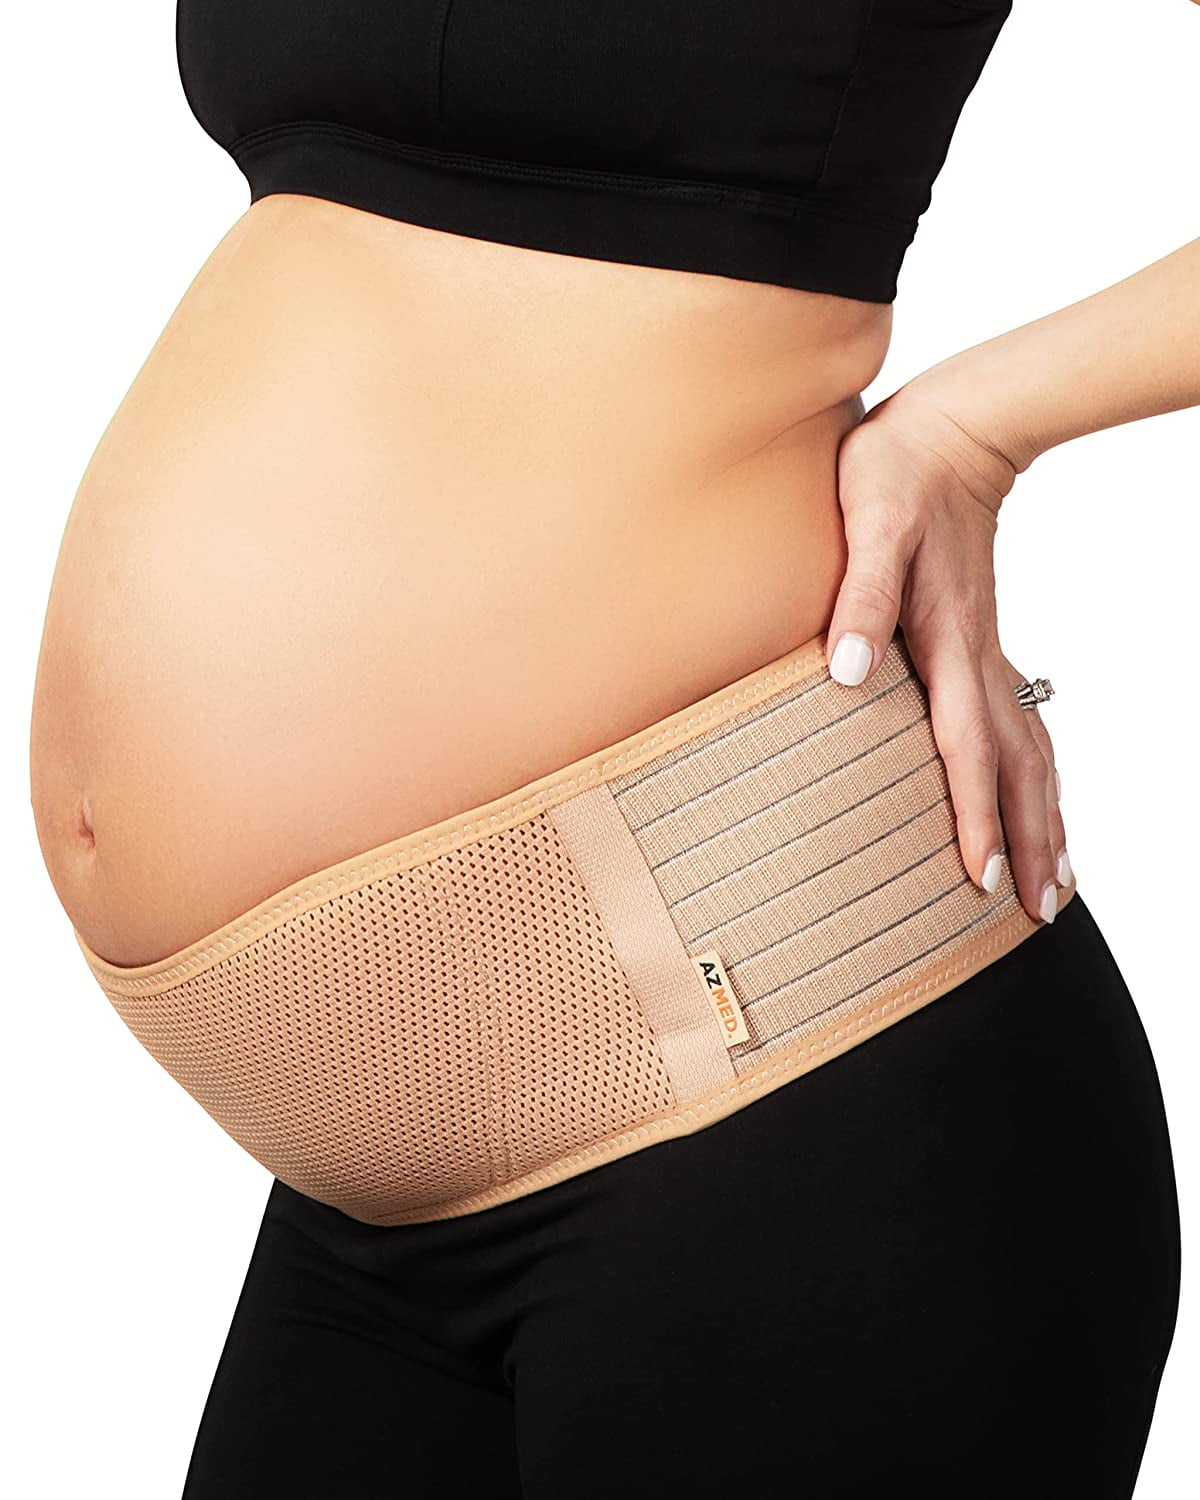 Azmed Maternity Belly Band for Pregnant Women, Pregnancy Belly Support Band  for Abdomen, Pelvic, Waist, & Back Pain, Adjustable Maternity Belt